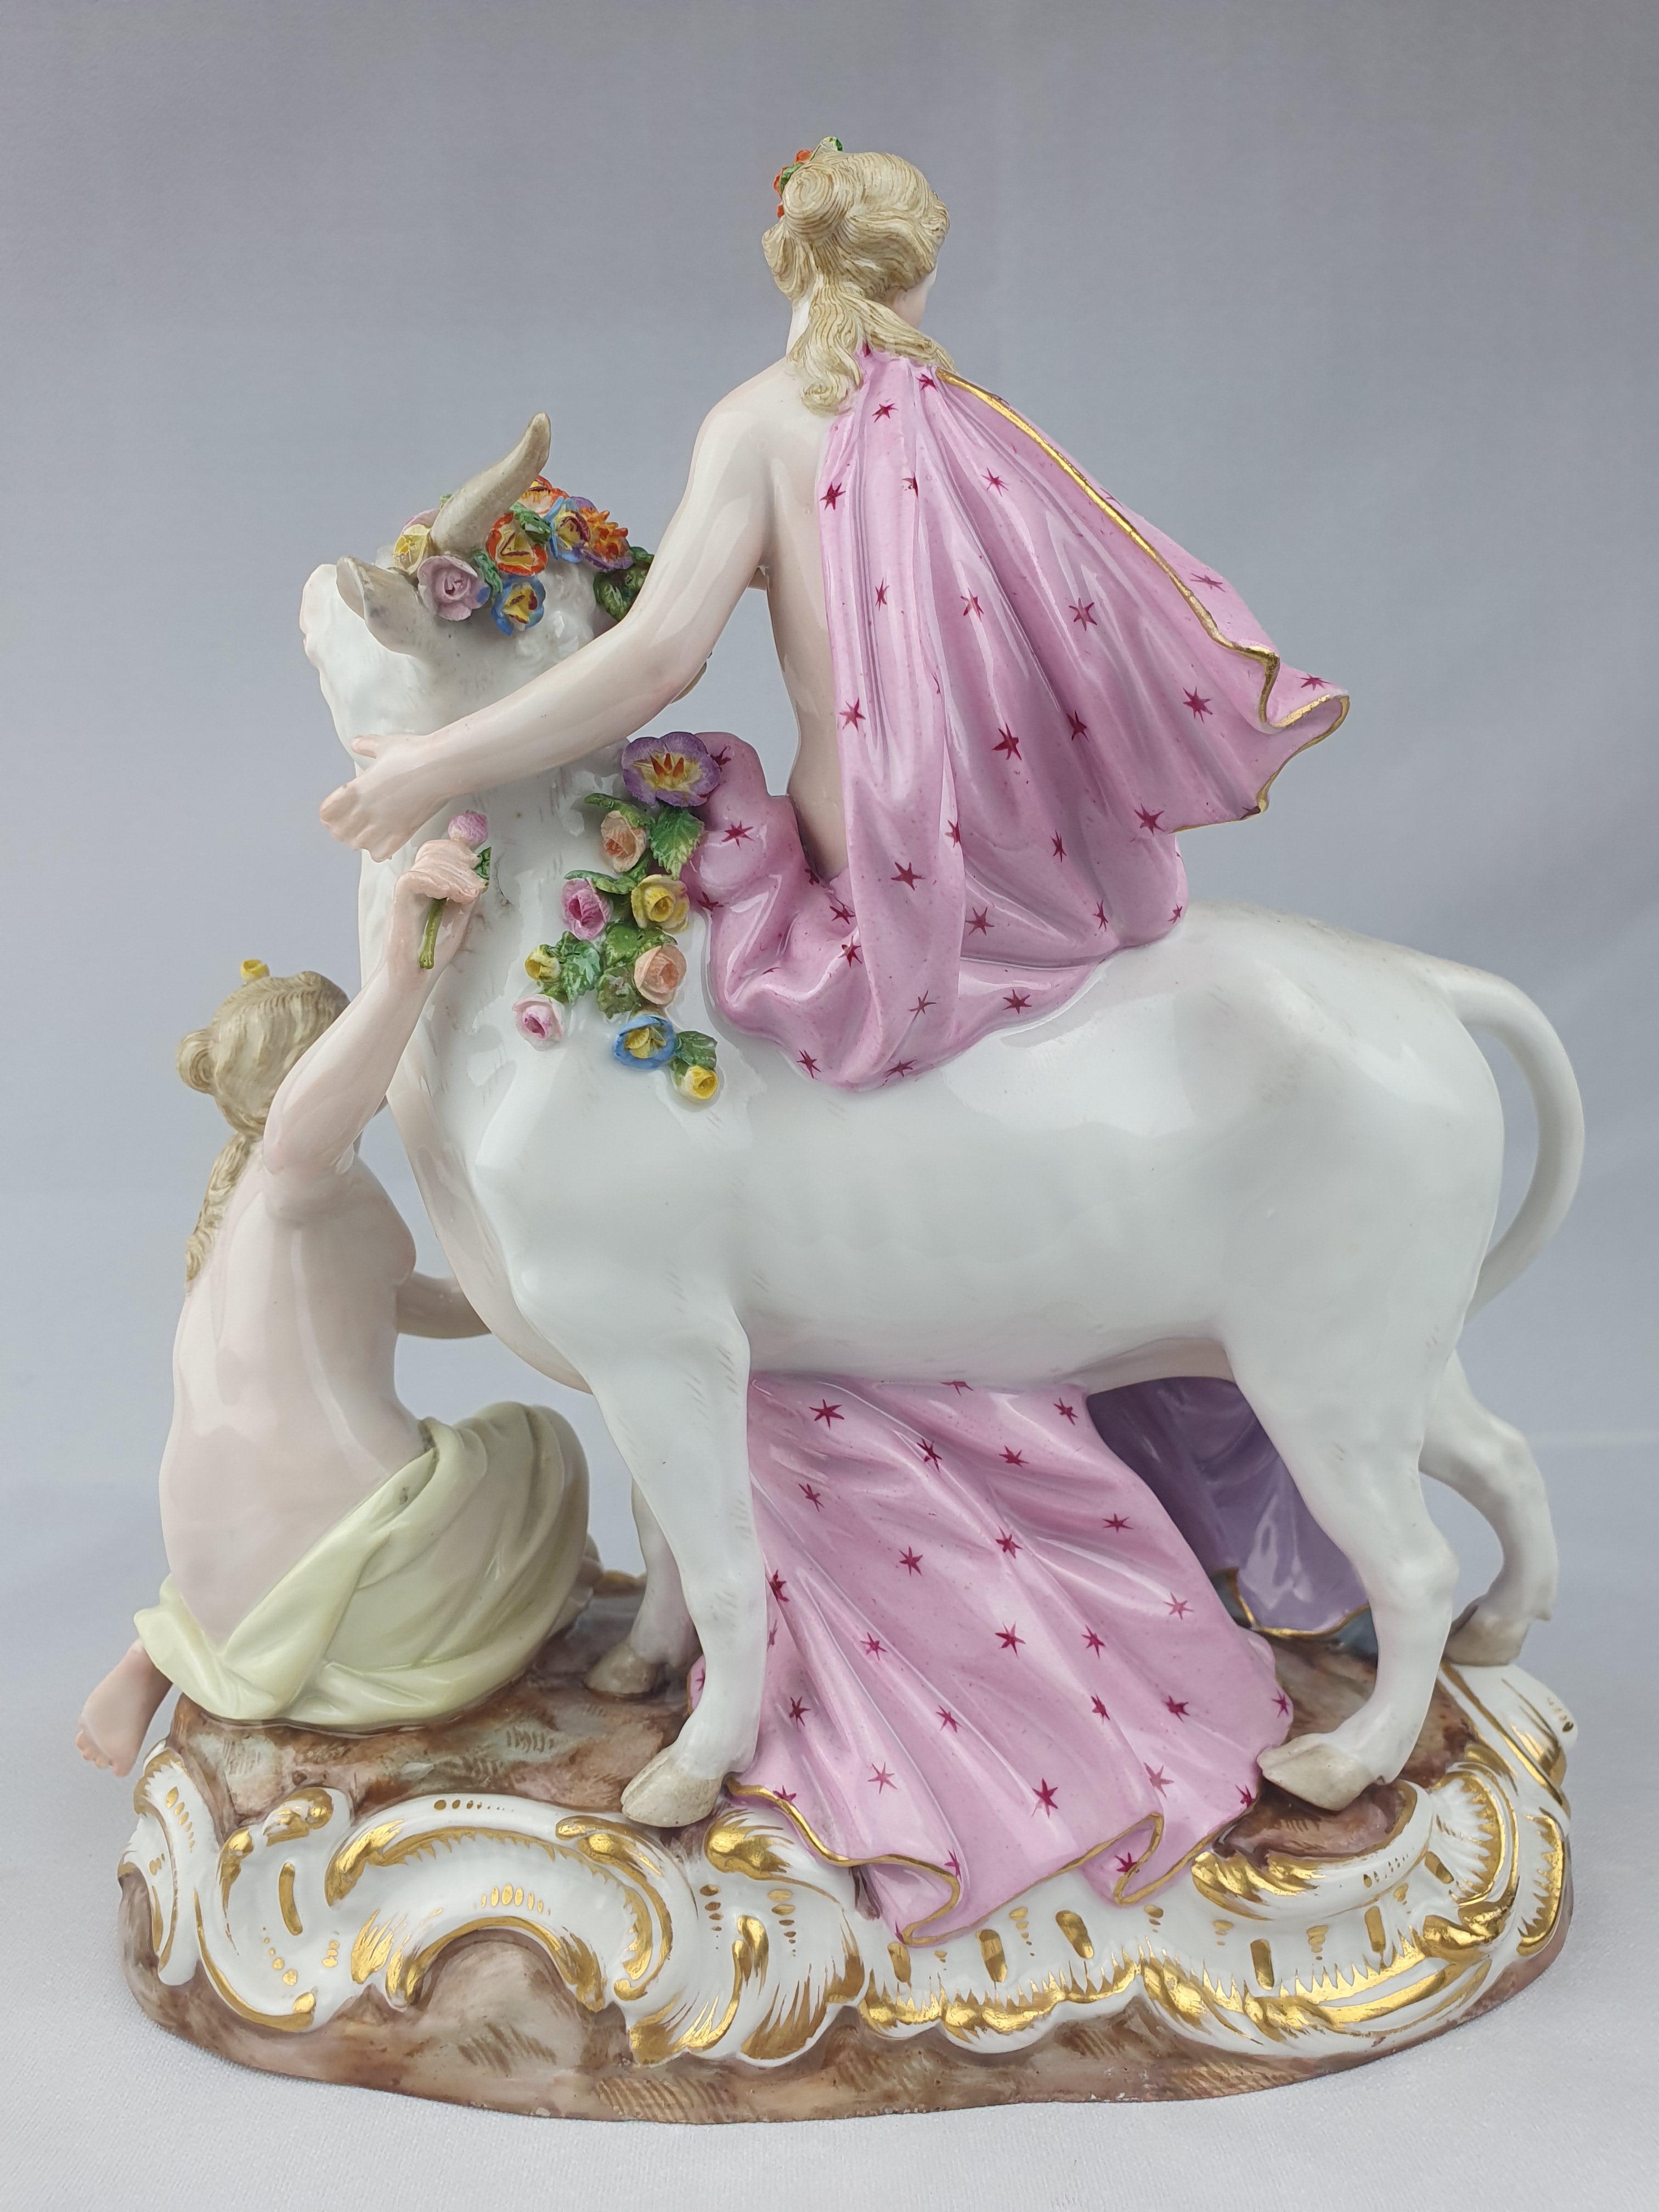 Meissen group of Europa and the Bull. Europa sitting on white bull with two female attendants sitting either side of her. The god Zeus has transformed himself in to a docile white bull in order to gain the confidence of Europa before he carries her